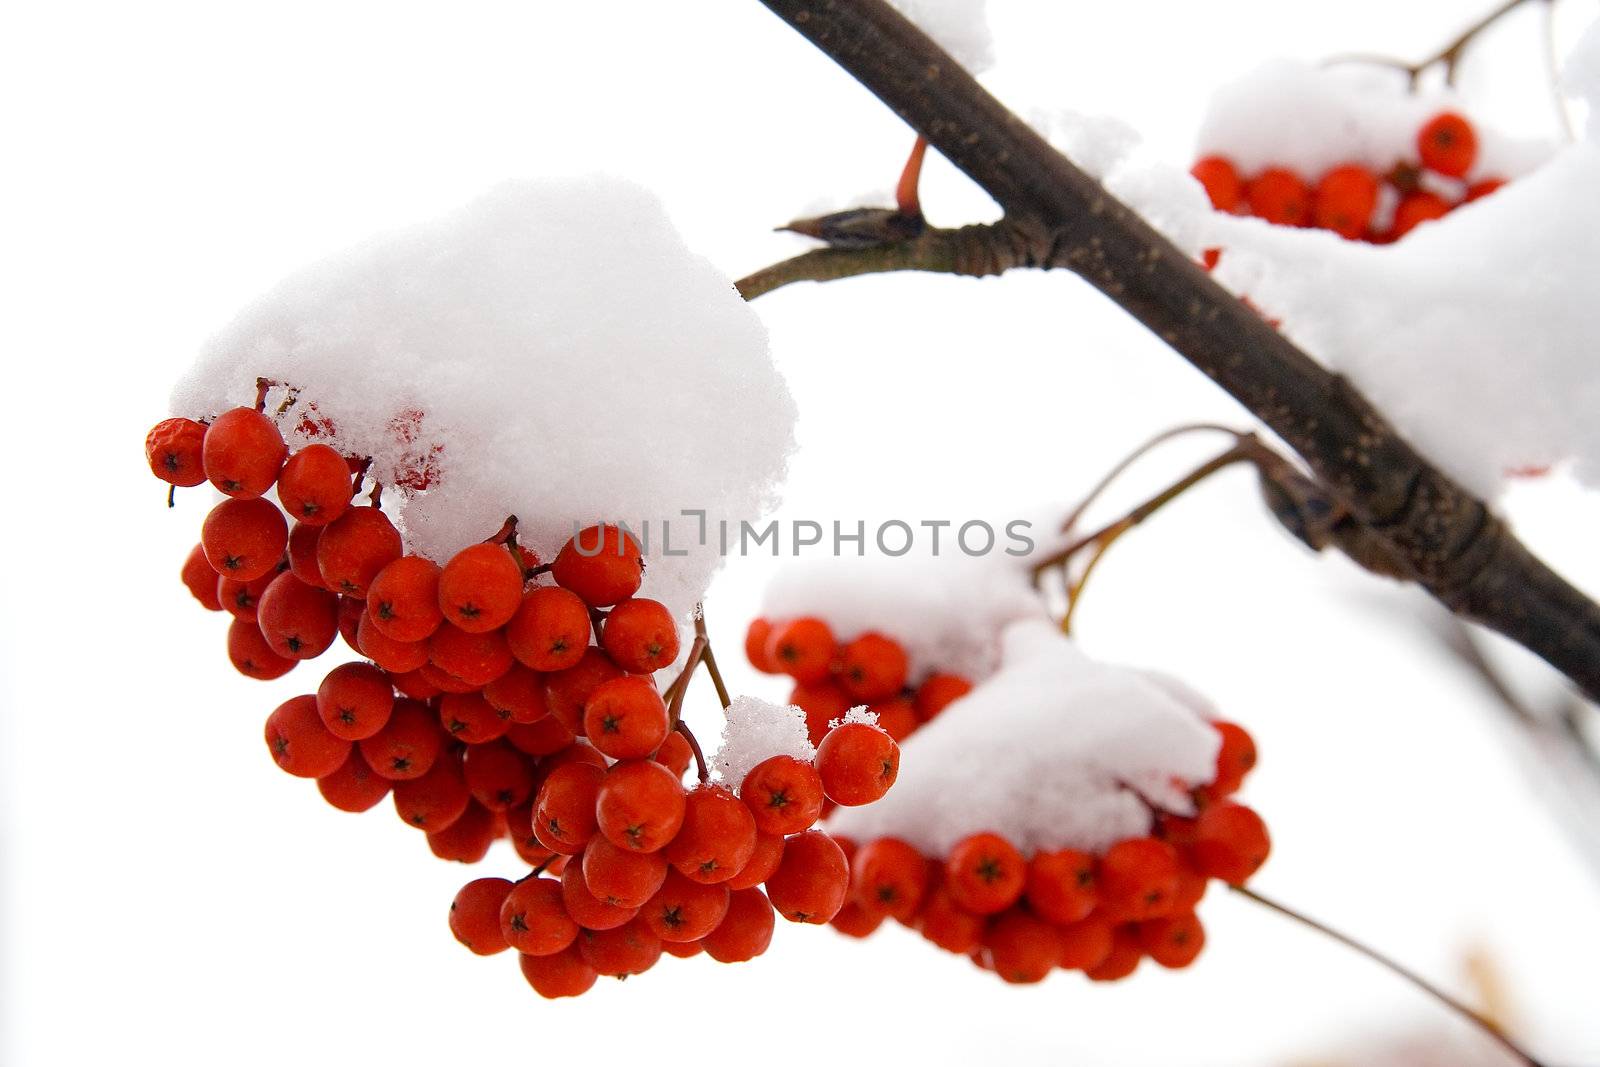 Ashberry on a snowy treebranch. On a white background.